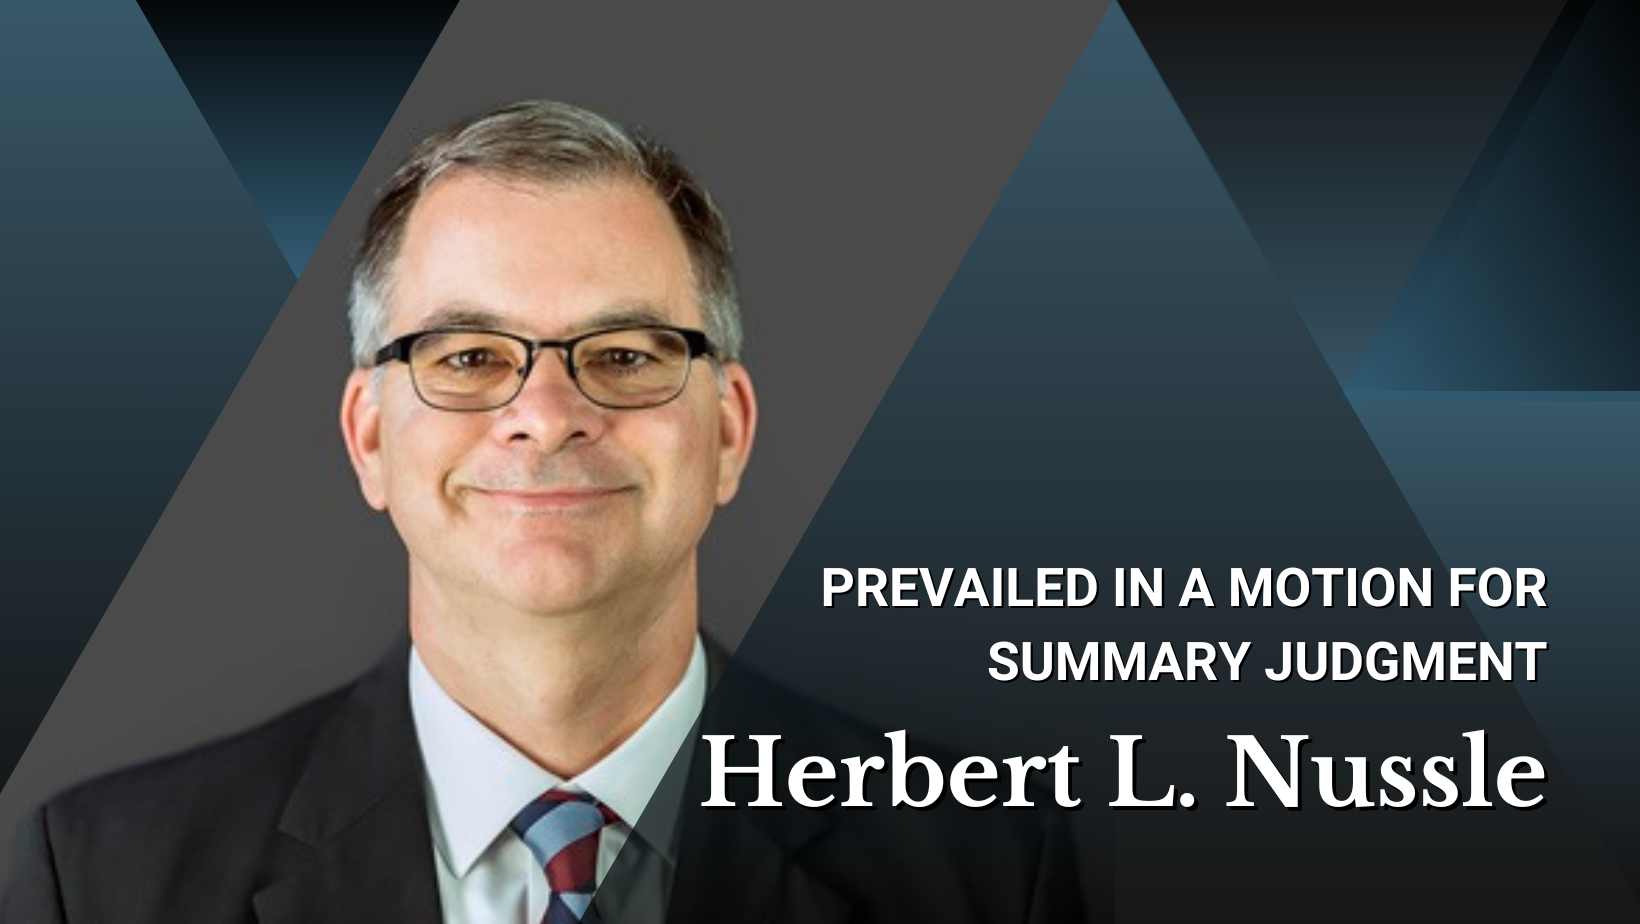 Picture of Herbert L. Nussle with hues of black, grey, and blue and text reading Herbert L. Nussle prevailed in a motion for summary judgment